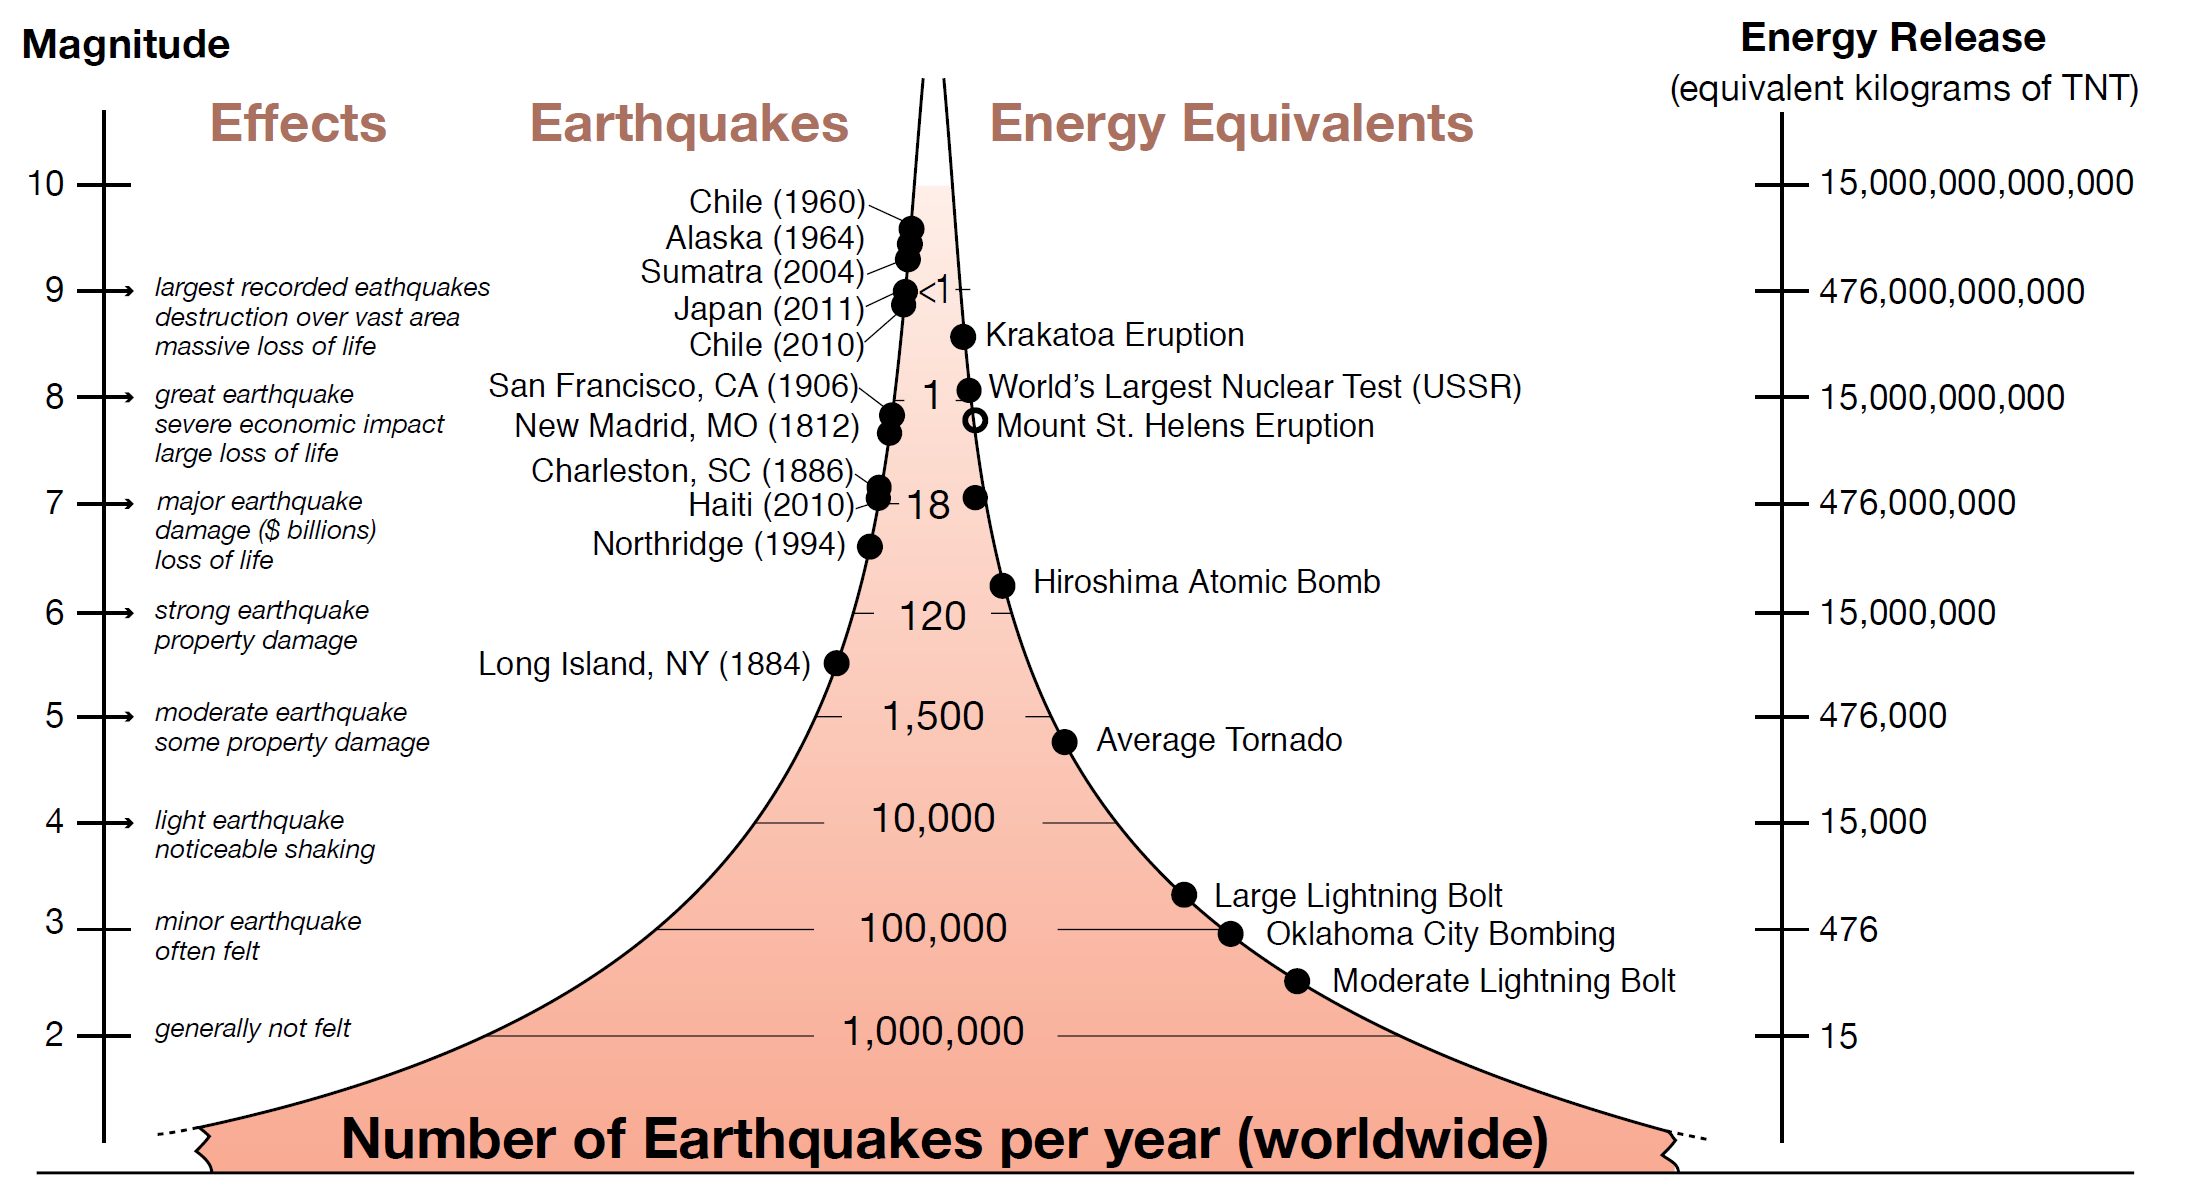 Image displaying the worldwide, yearly number of earthquakes for each magnitude.